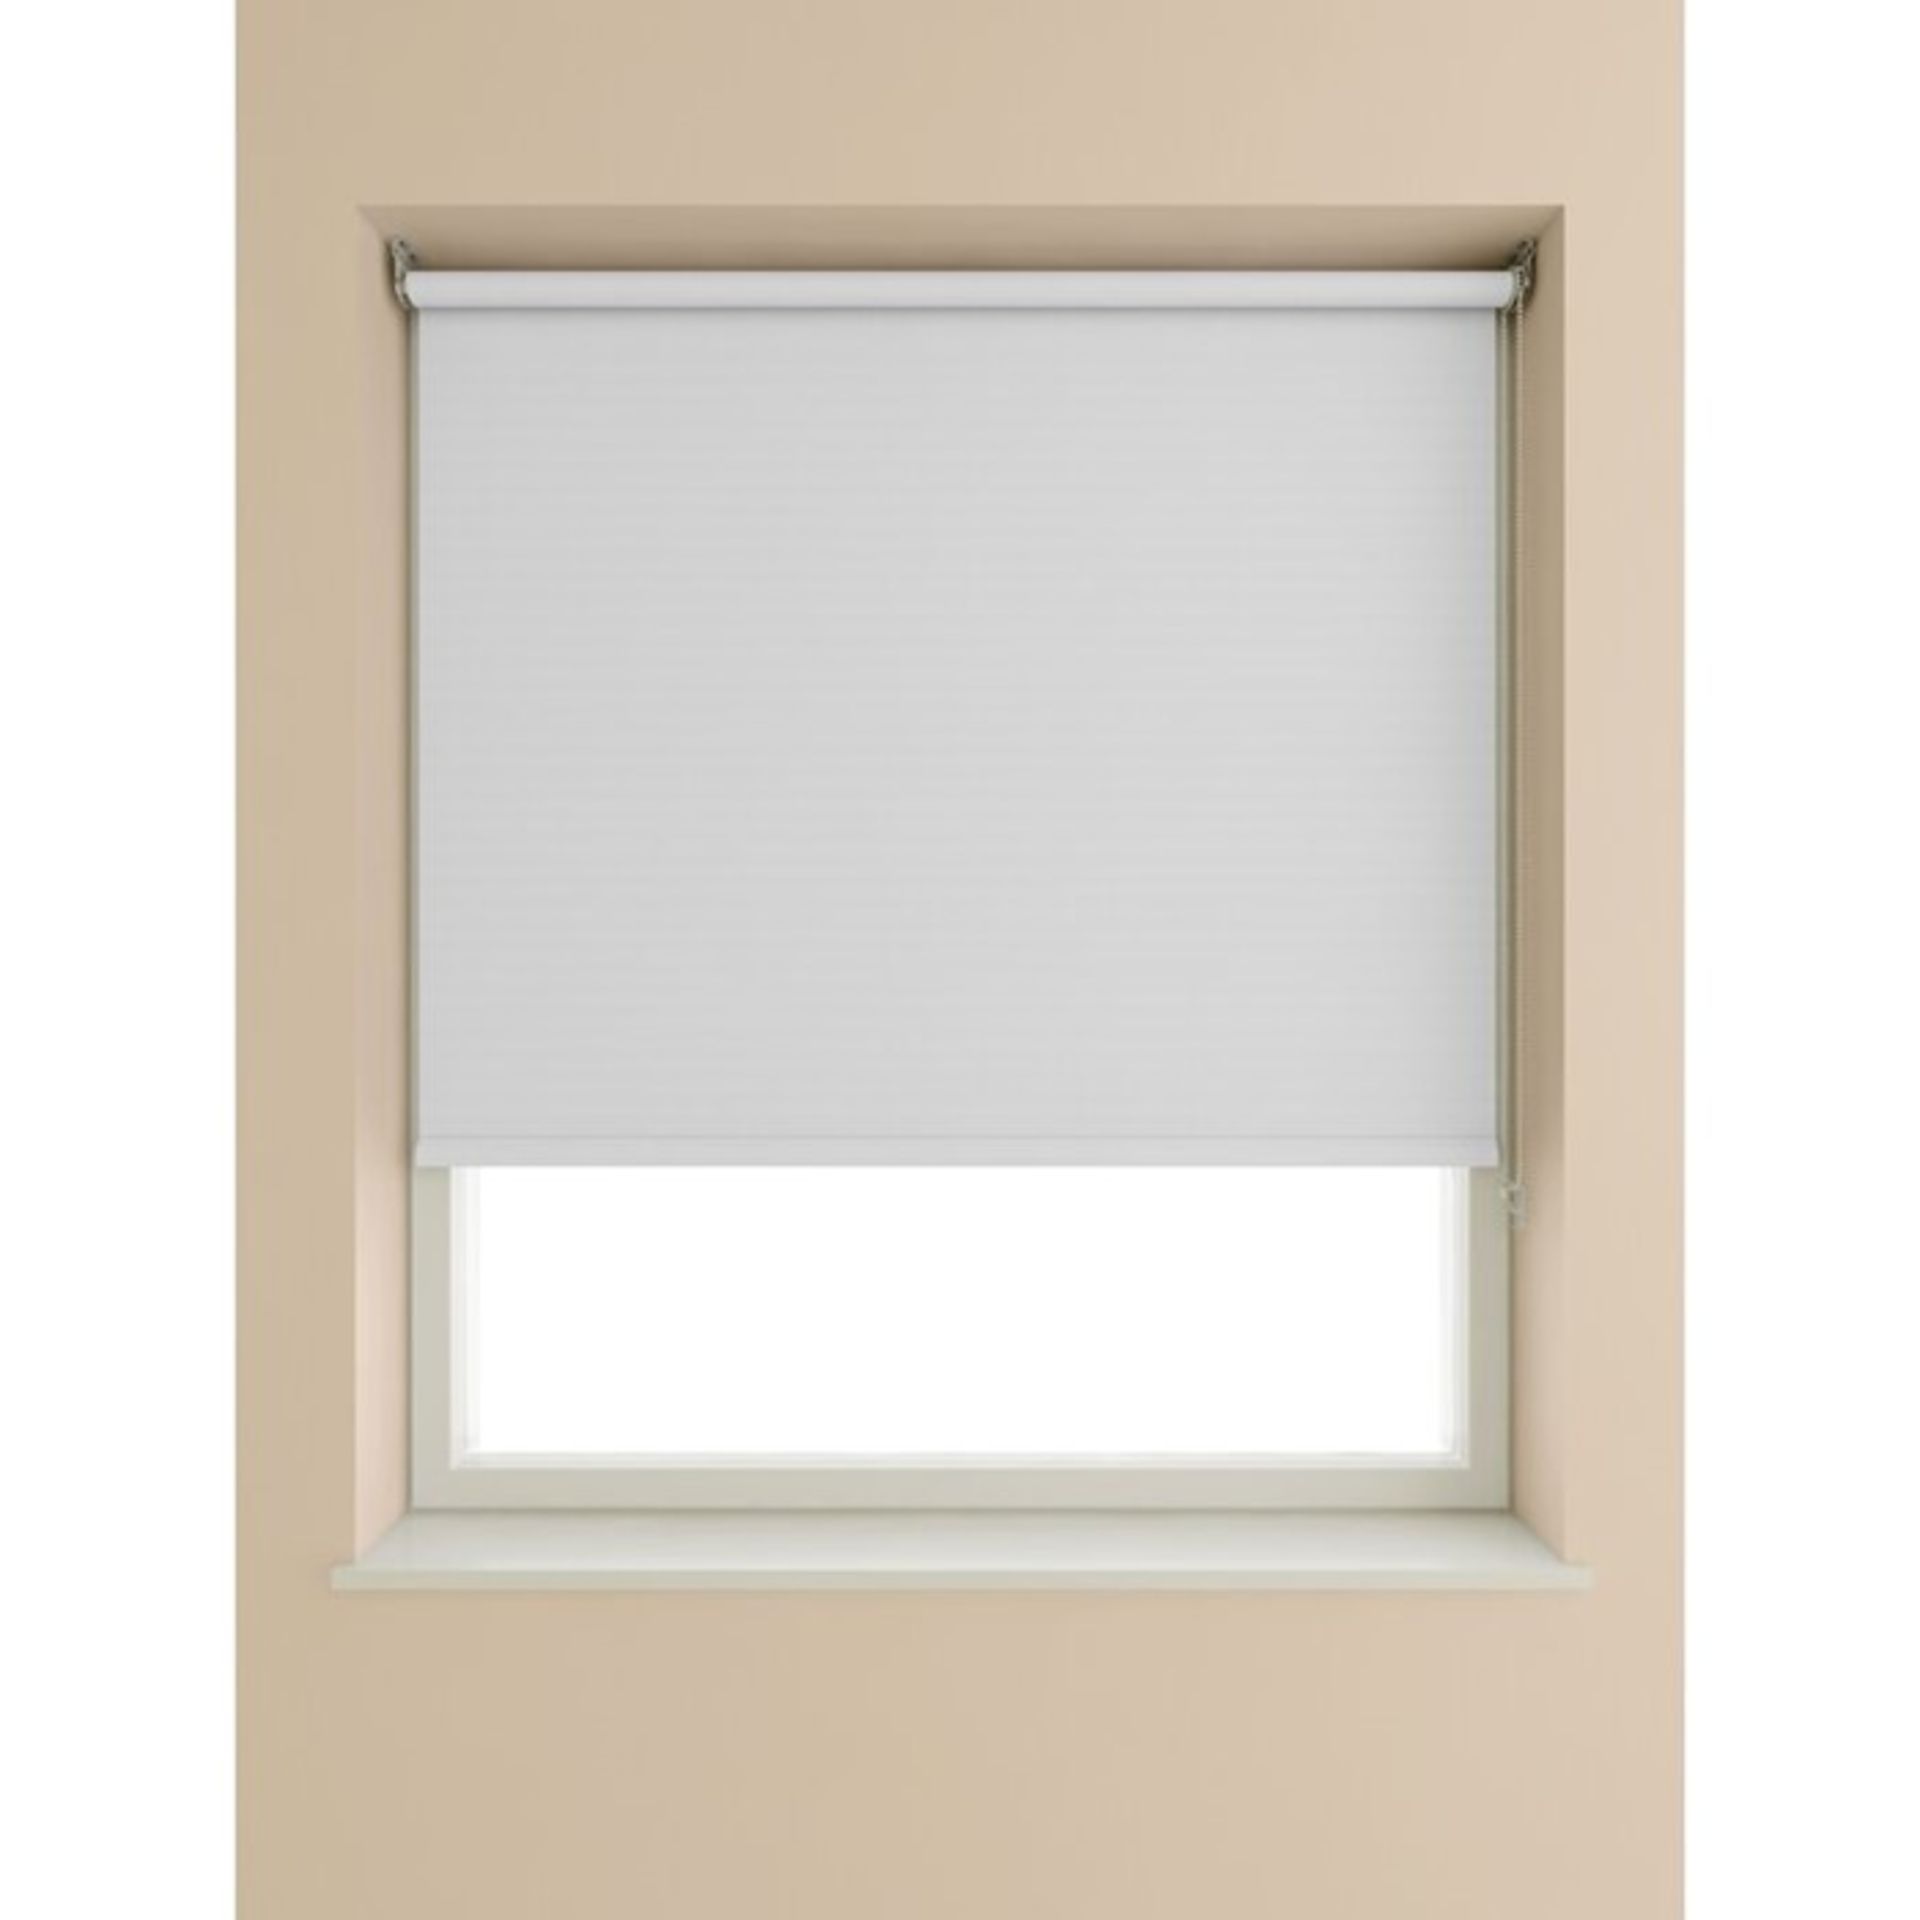 Symple Stuff, Blackout Roller Blind X2 (120CM)(CHOCOLATE) - RRP £25.99 (SYMS2640 - 12120/11) 2A